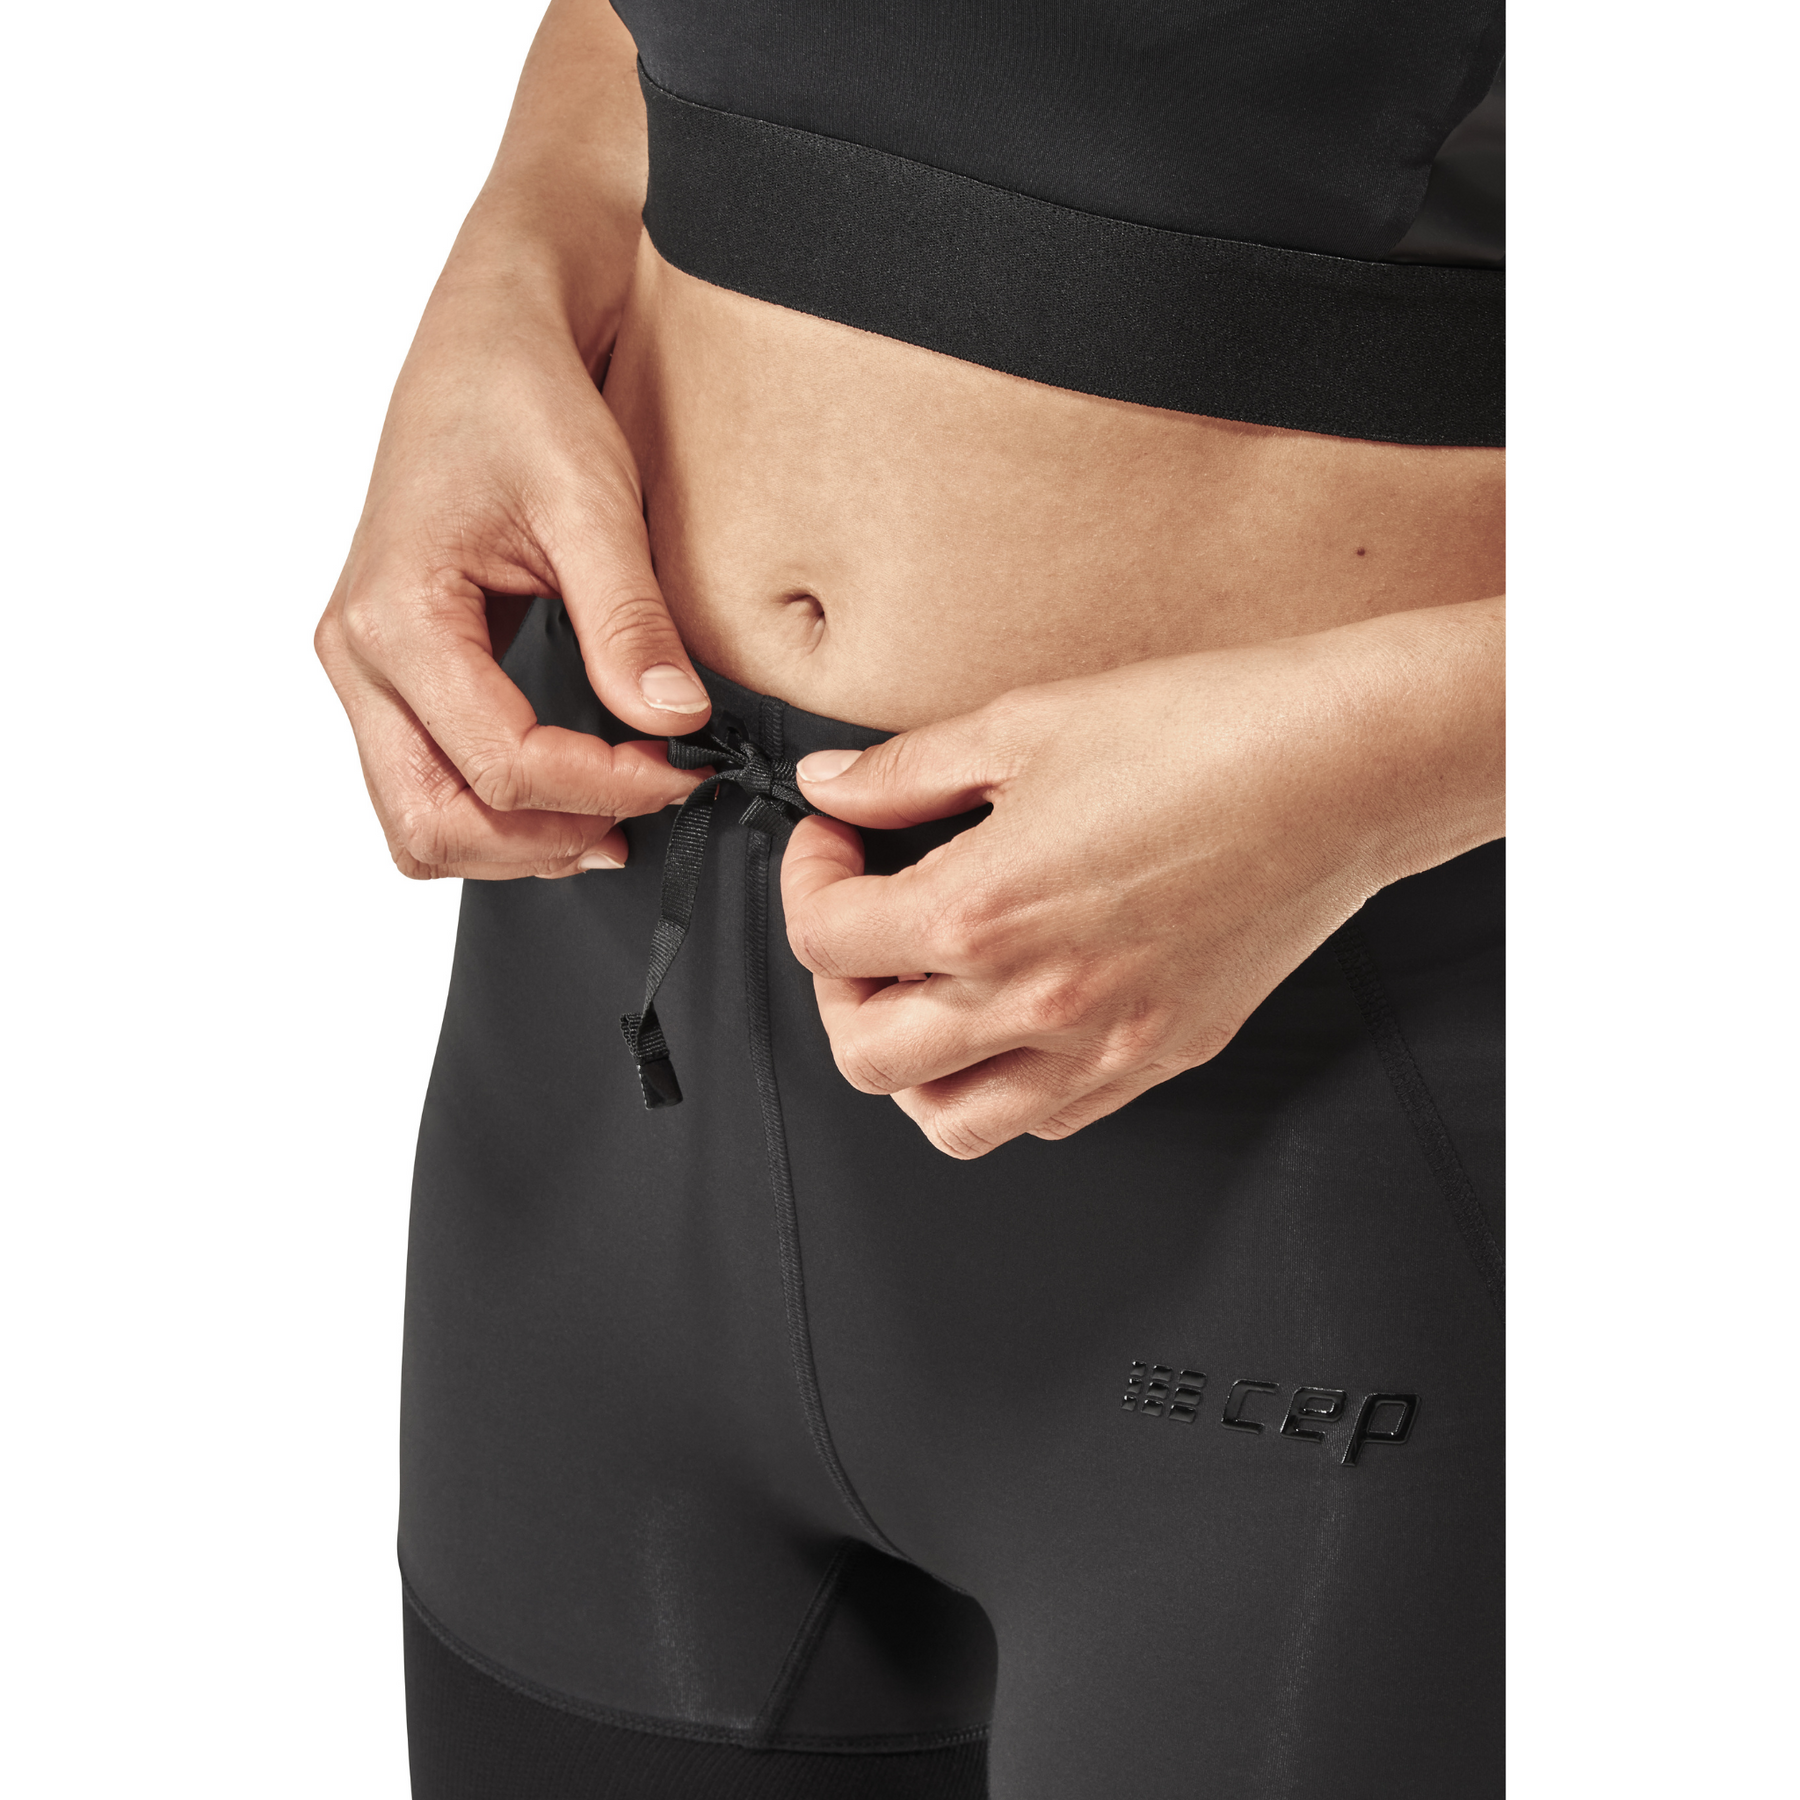 Compression Run Shorts 4.0 for Women | CEP Activating Sportswear – CEP  Compression